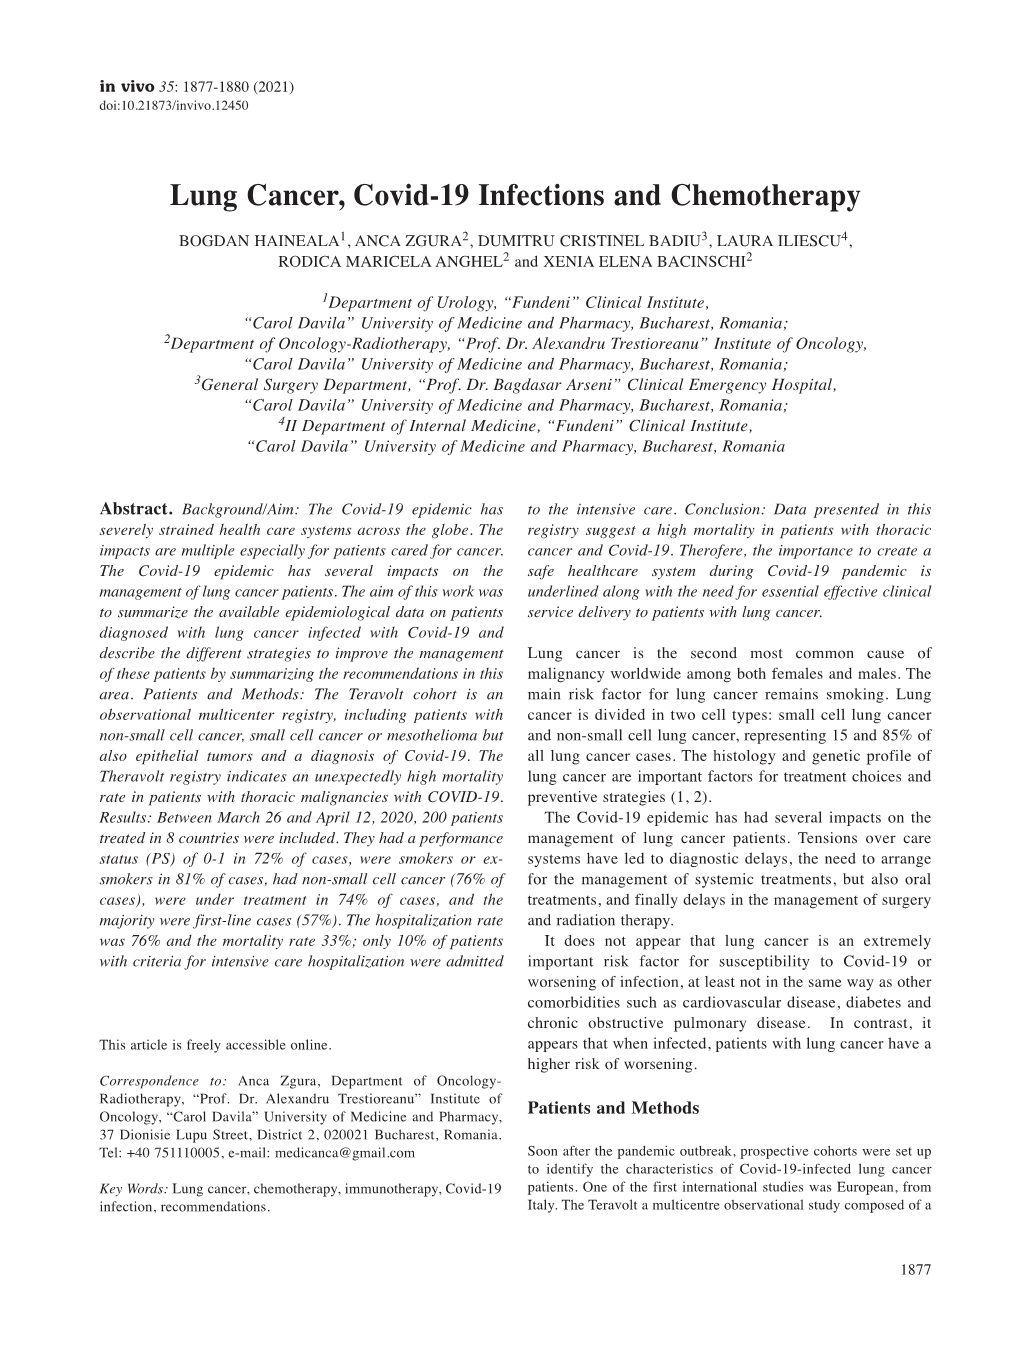 Lung Cancer, Covid-19 Infections and Chemotherapy